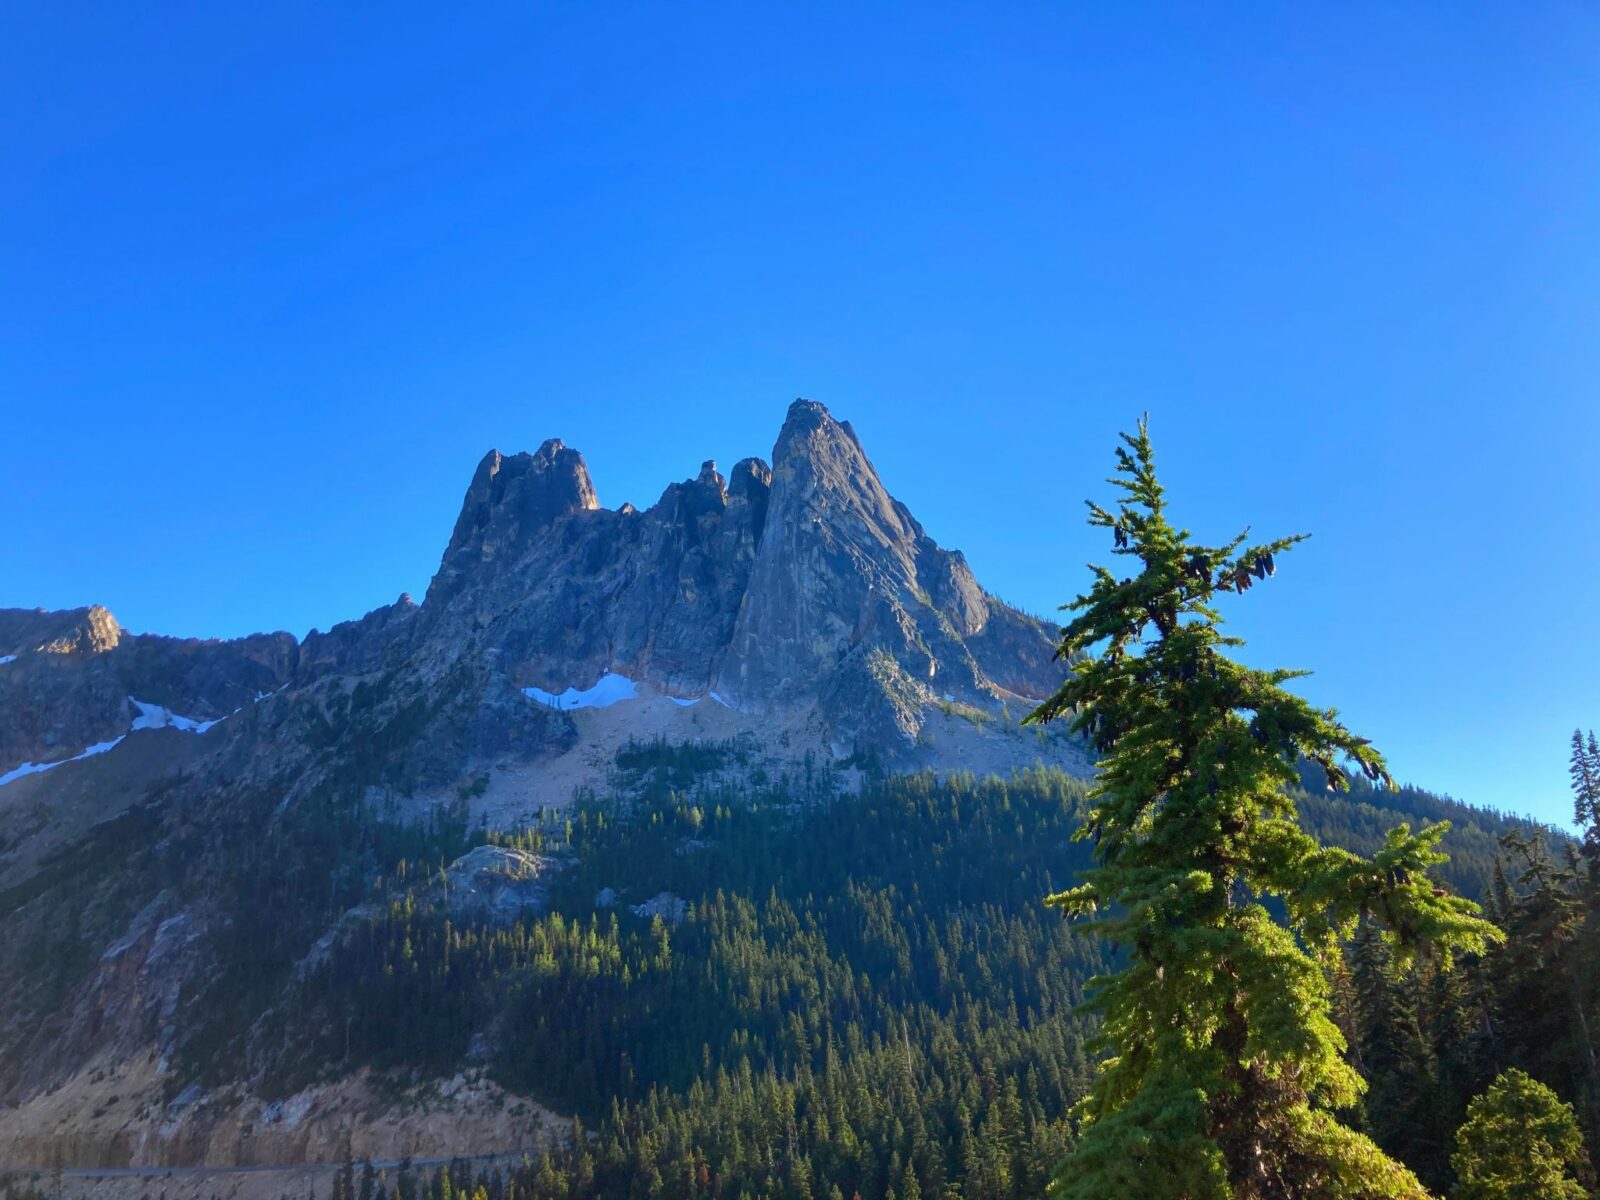 A steep mountain with two steep sides and a lower middle section is seen across the valley on a completely clear day in North Cascades National Park. There are evergreen trees on the side of the mountain and some in the foreground.